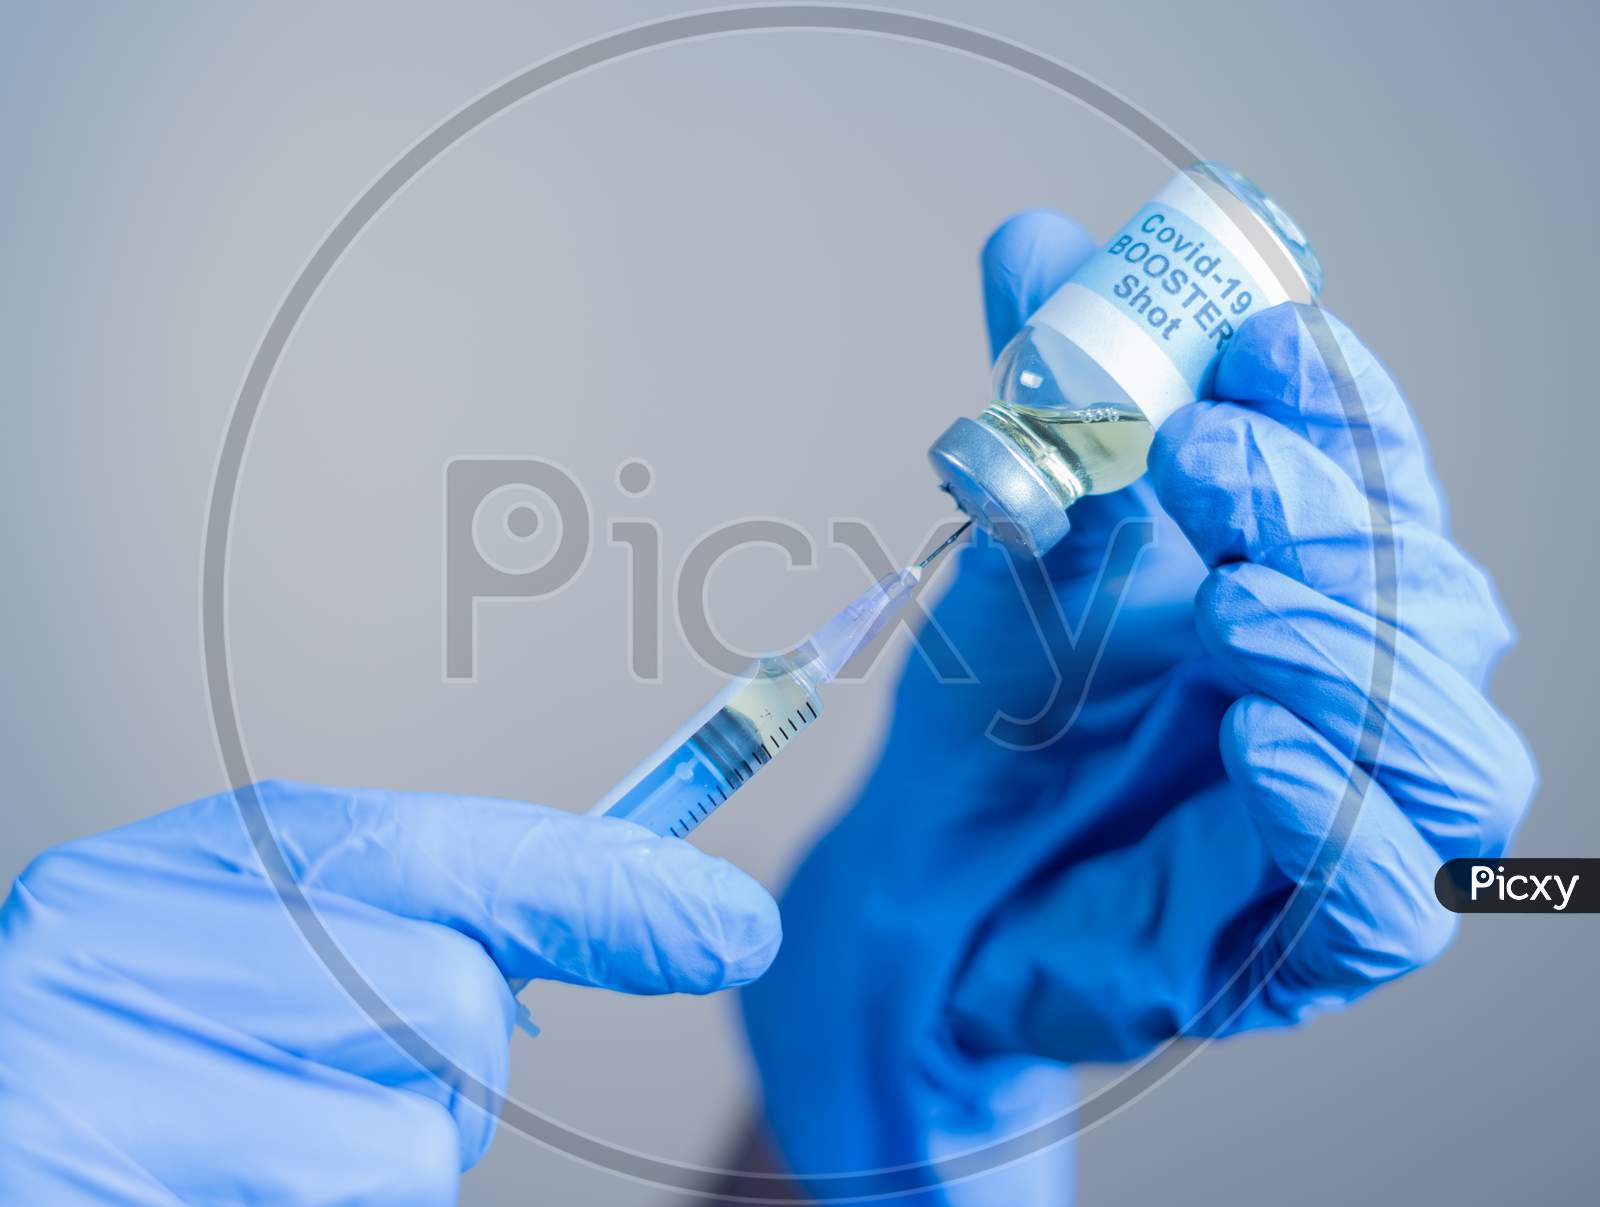 Focus On Syringe, Close Up Of Doctor Or Nurse Hands Taking Covid Vaccination Booster Shot Or 3Rd Dose From Syringe